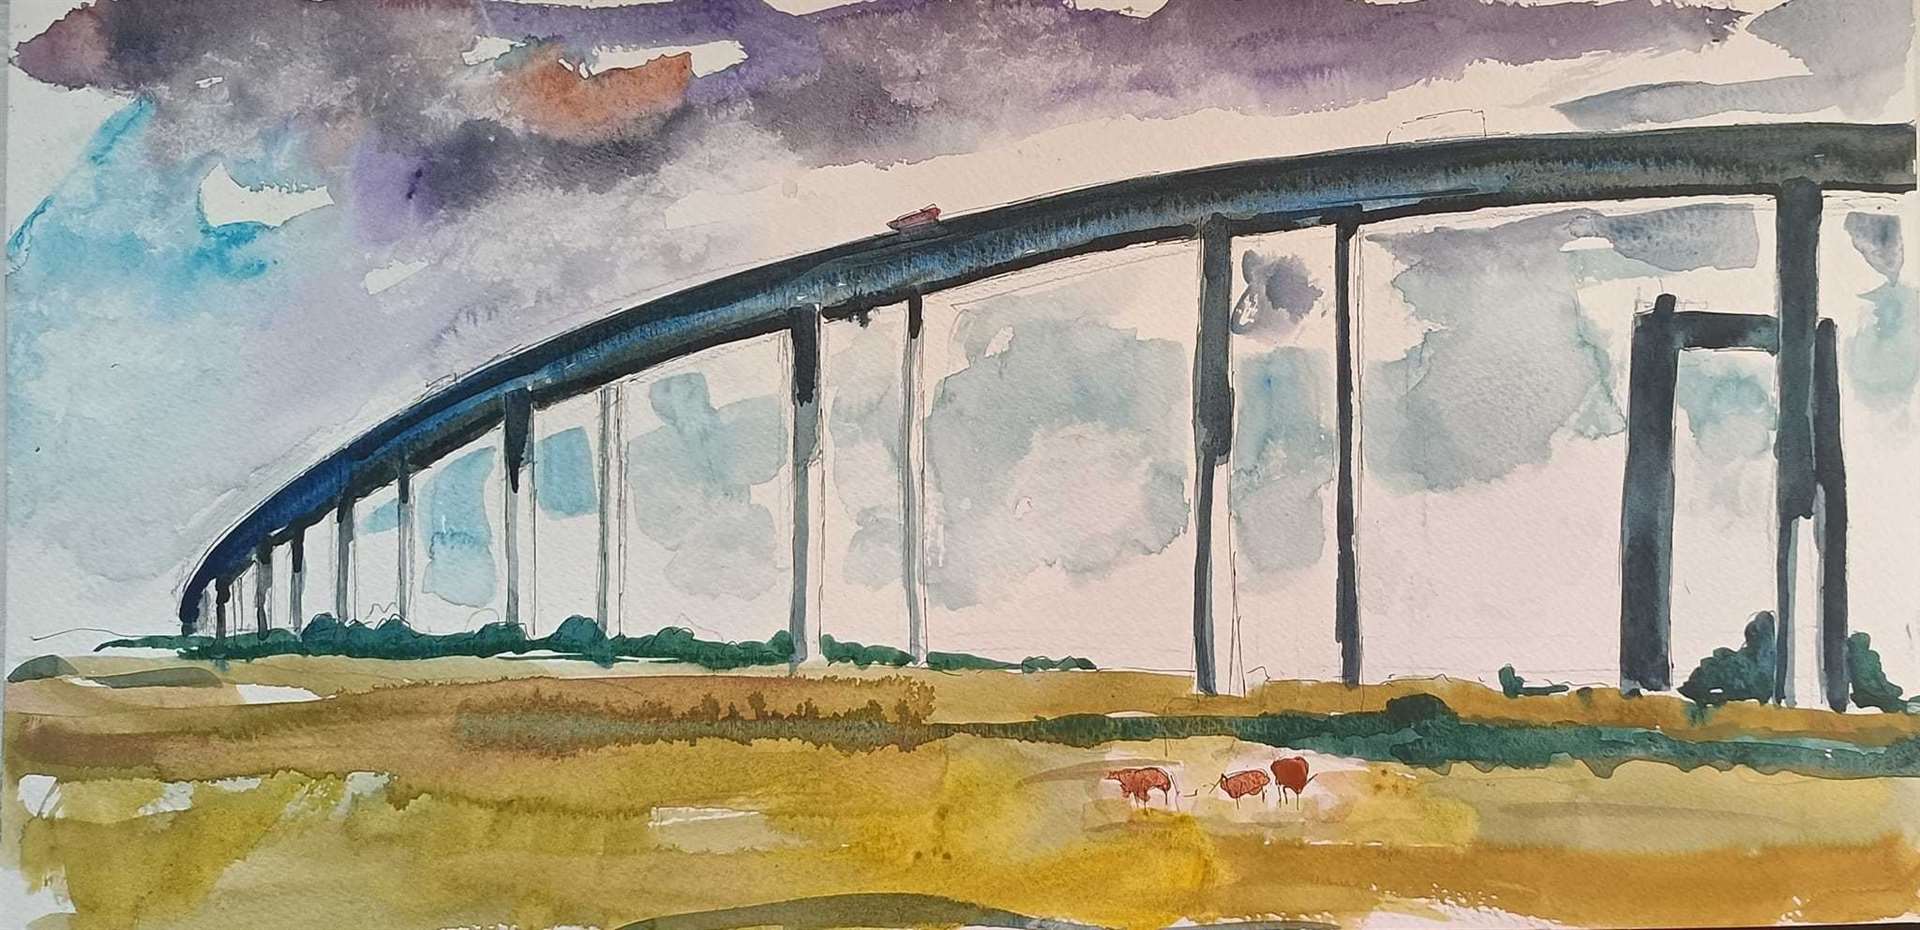 The Sheppey Crossing painted by former children's TV presenter Timmy Mallett. Painting copyright Timmy Mallett www.mallettspallette.co.uk